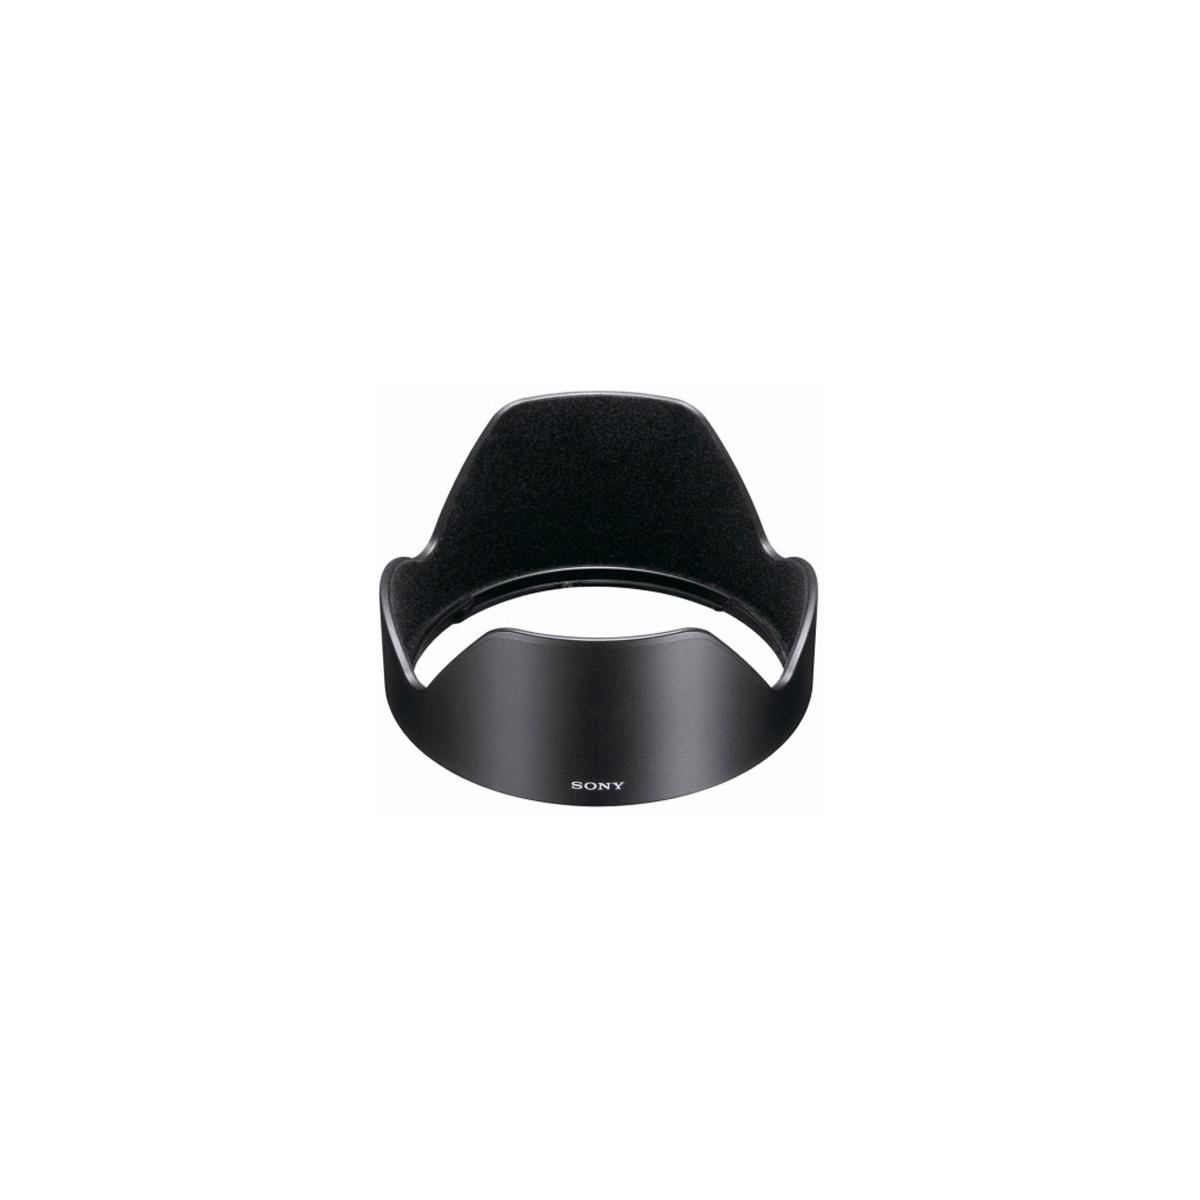 Image of Sony Lens Hood for Carl Zeiss Distagon T* 24mm f/2 SSM